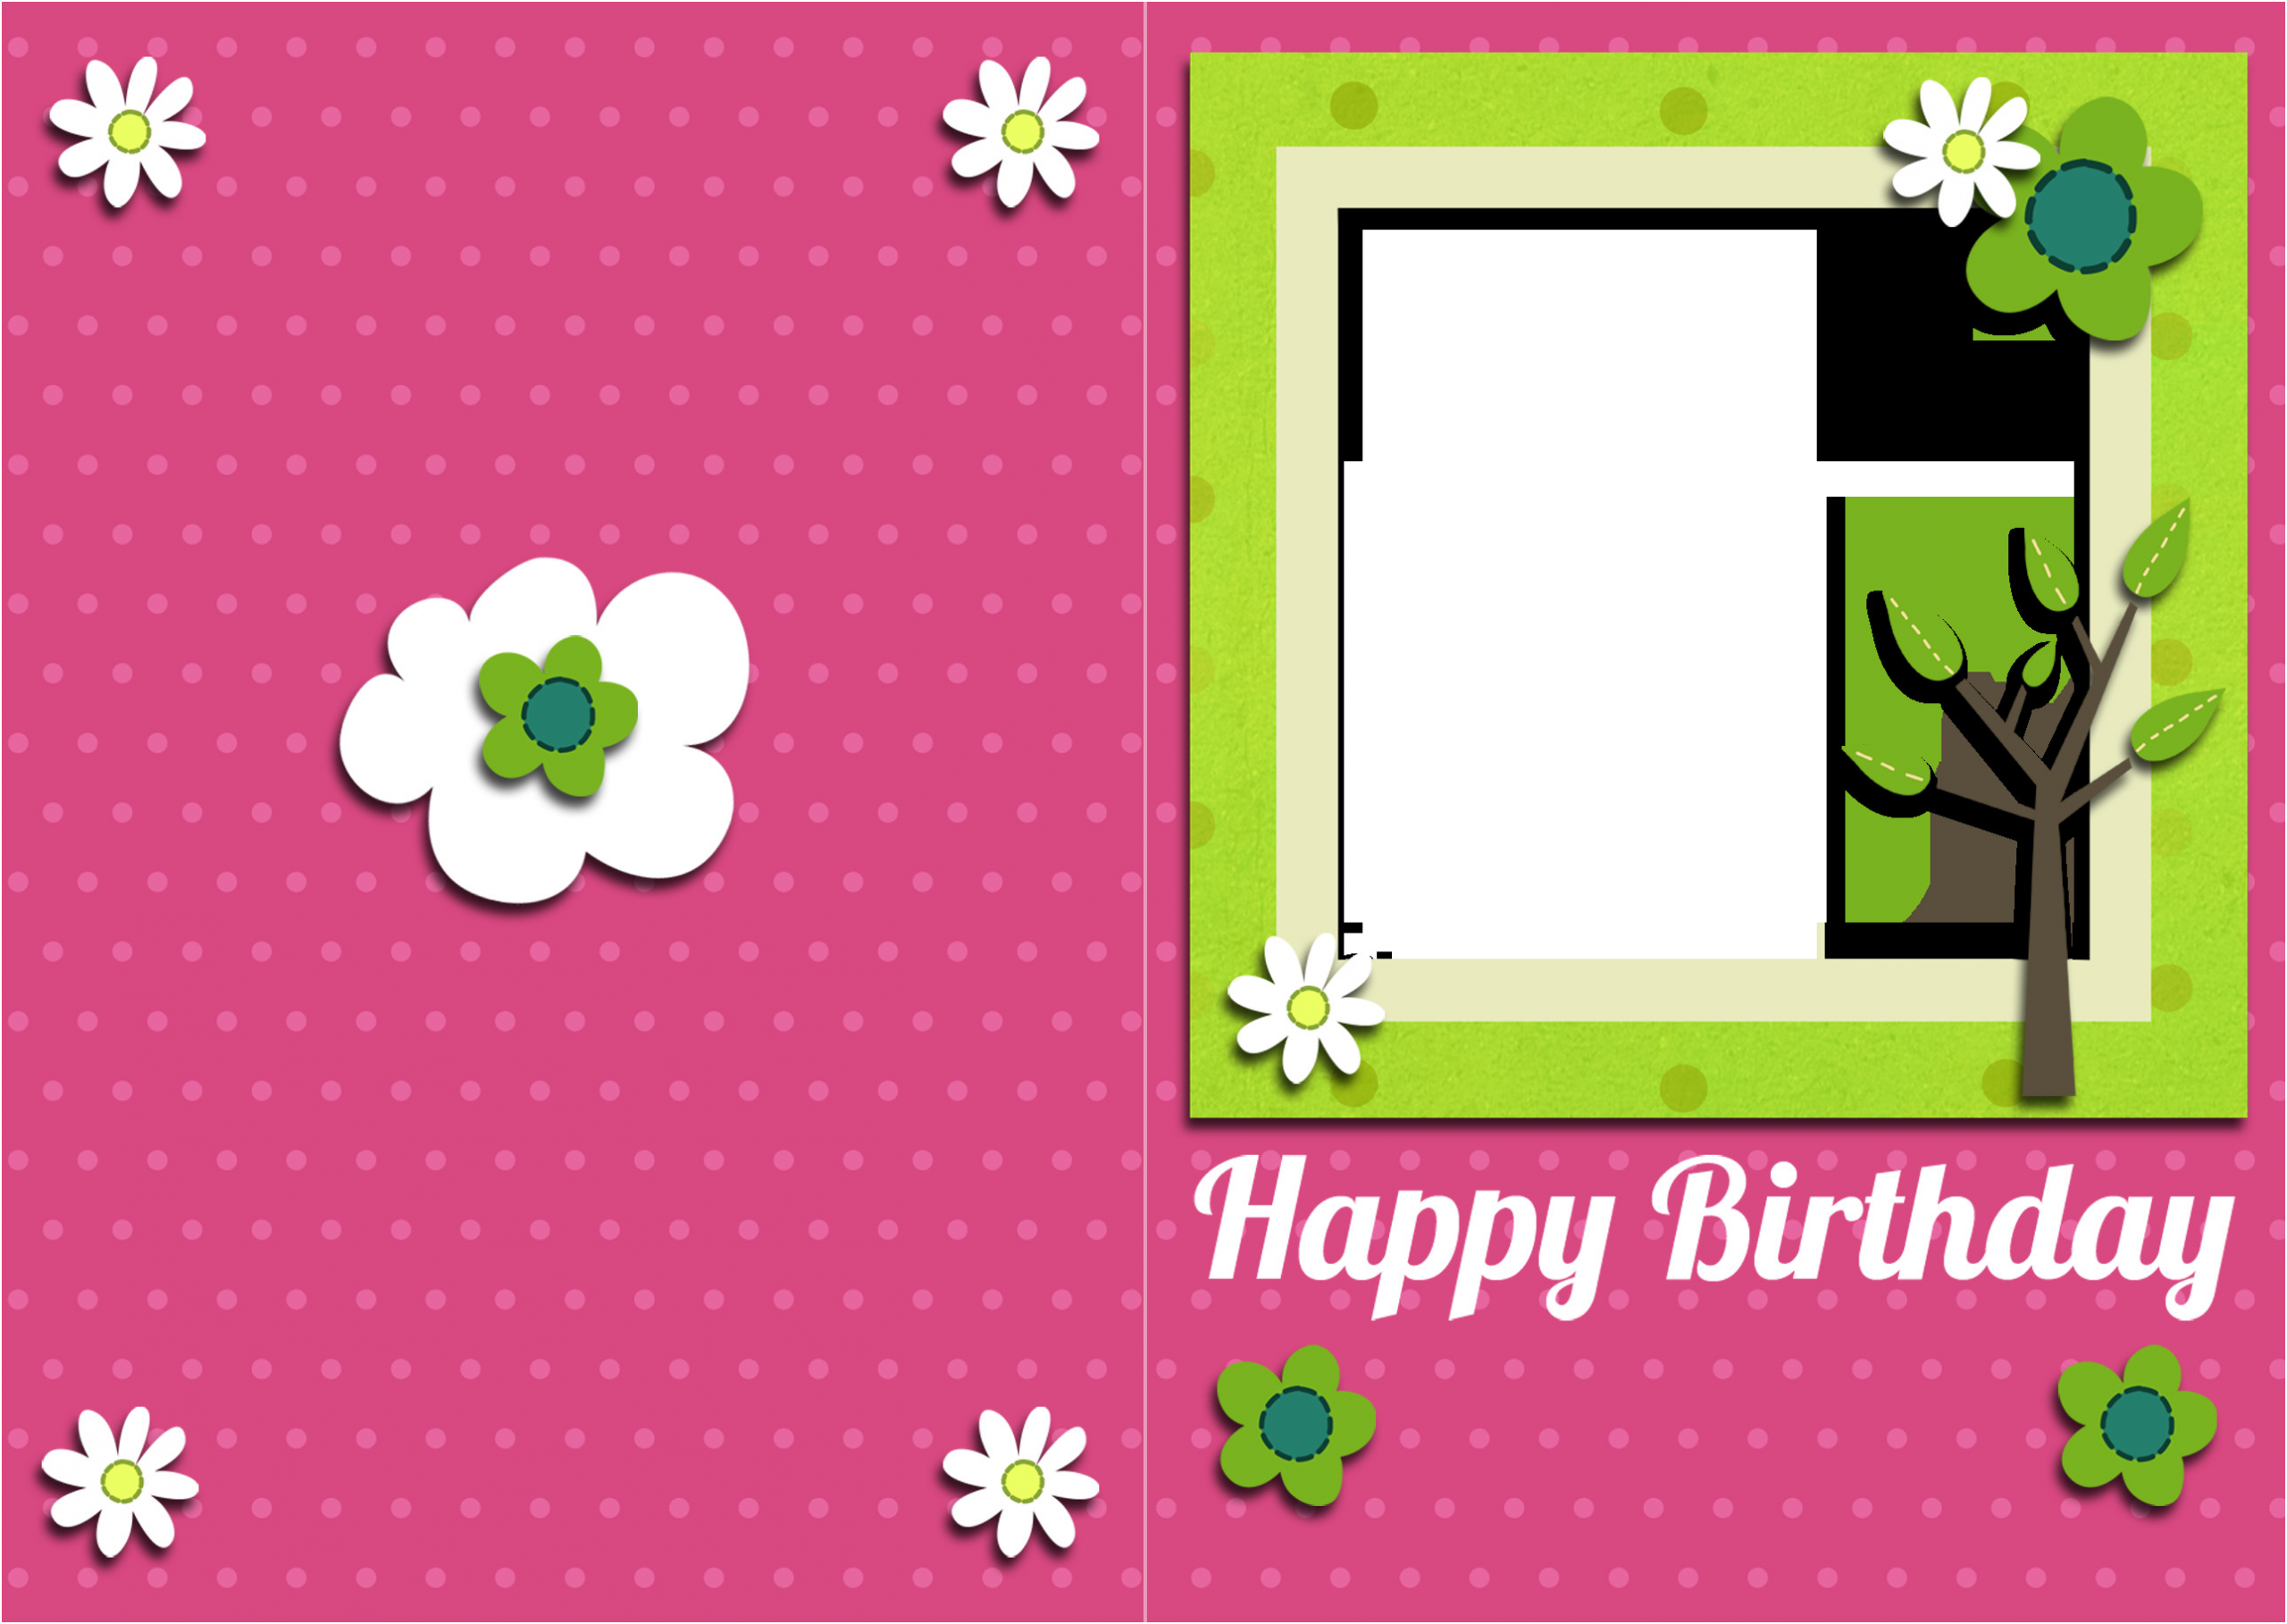 Happy Birthday Printable Cards
 35 Happy Birthday Cards Free To Download – The WoW Style